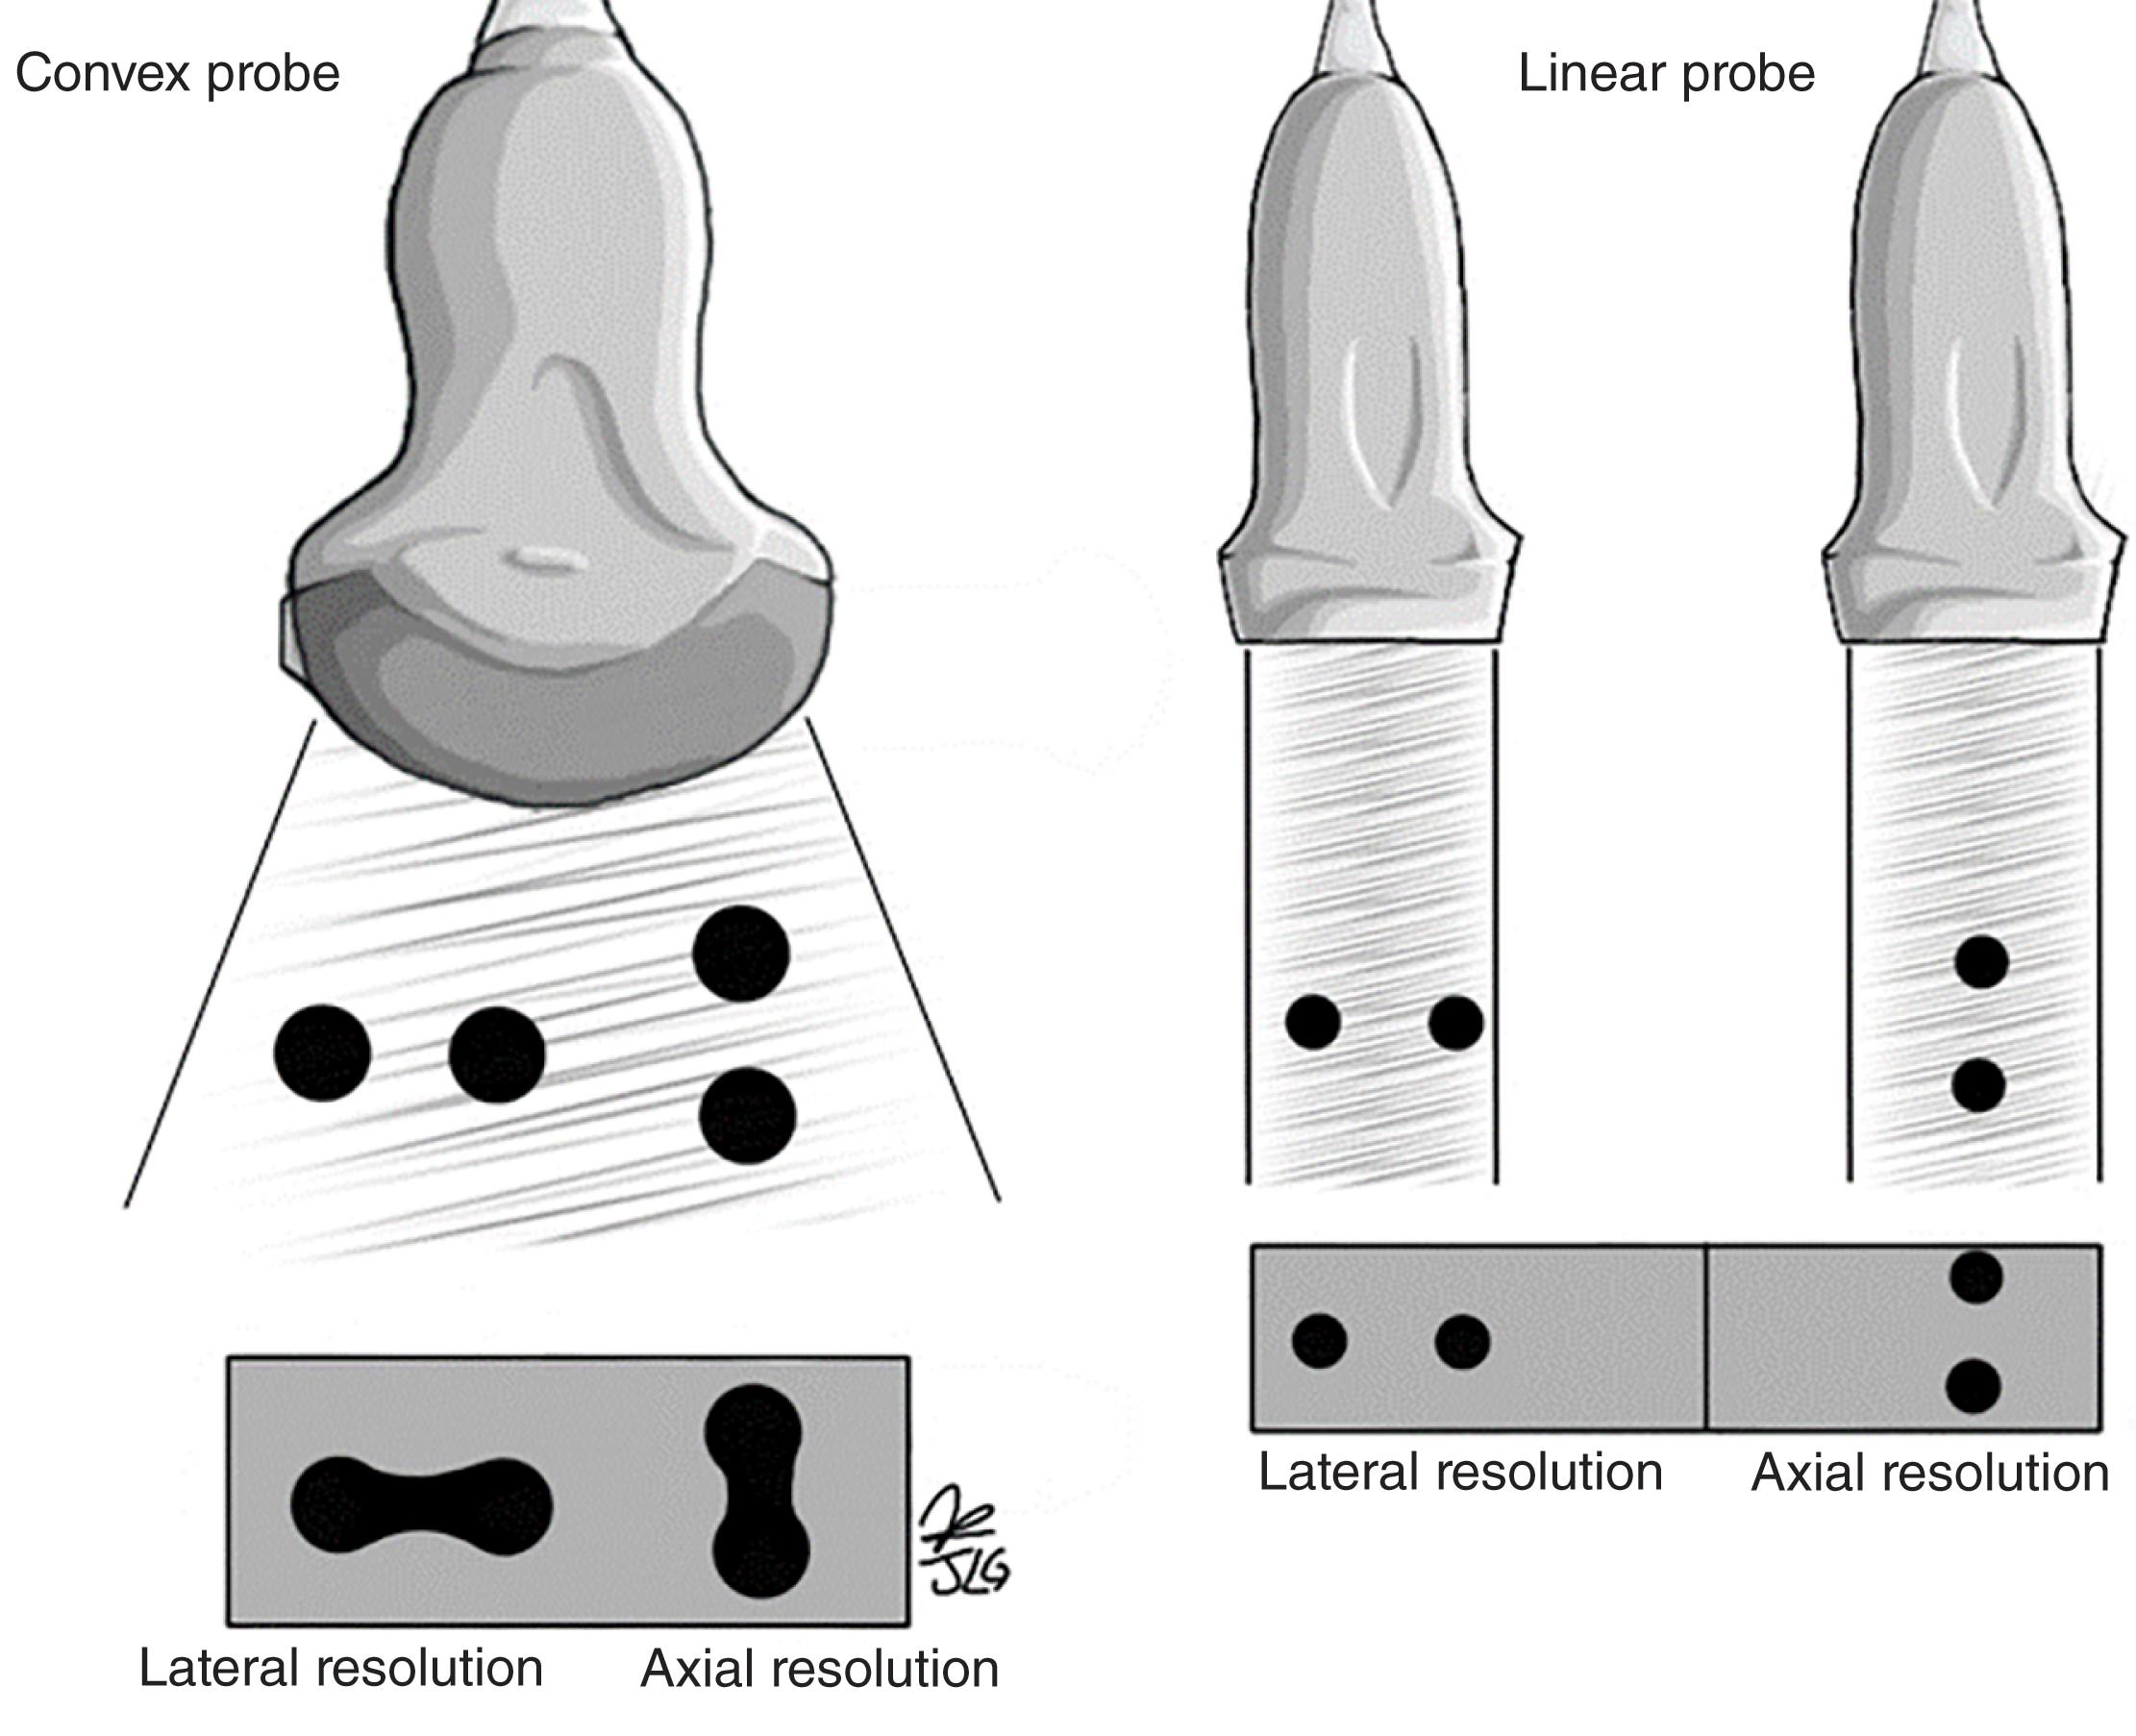 FIGURE 7, Differences between transducer types and quality of lateral and axial resolution.